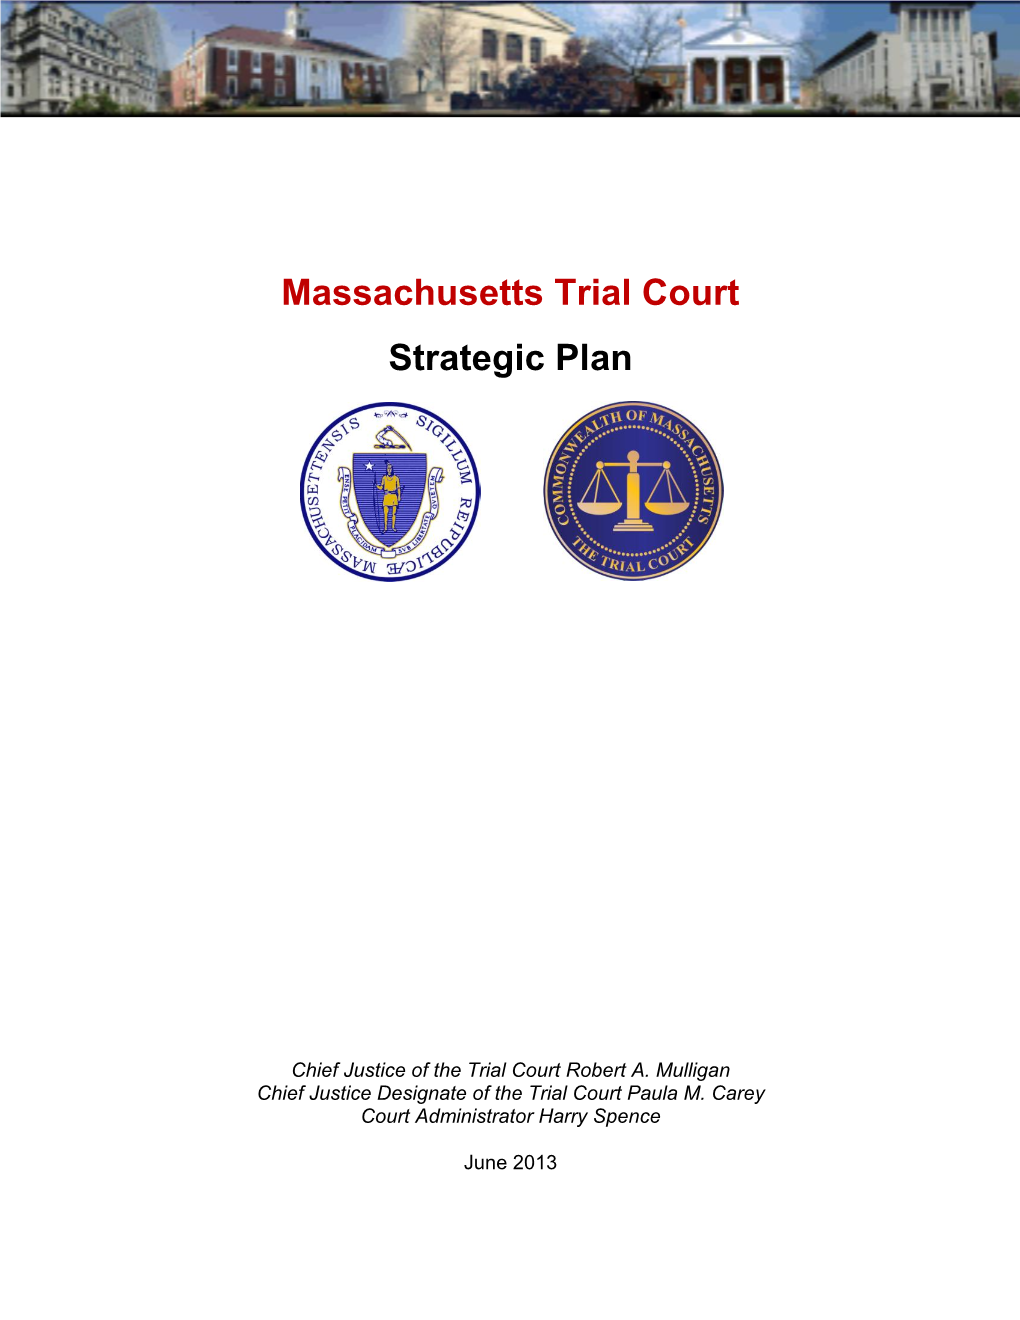 Strategic Plan of the Trial Court